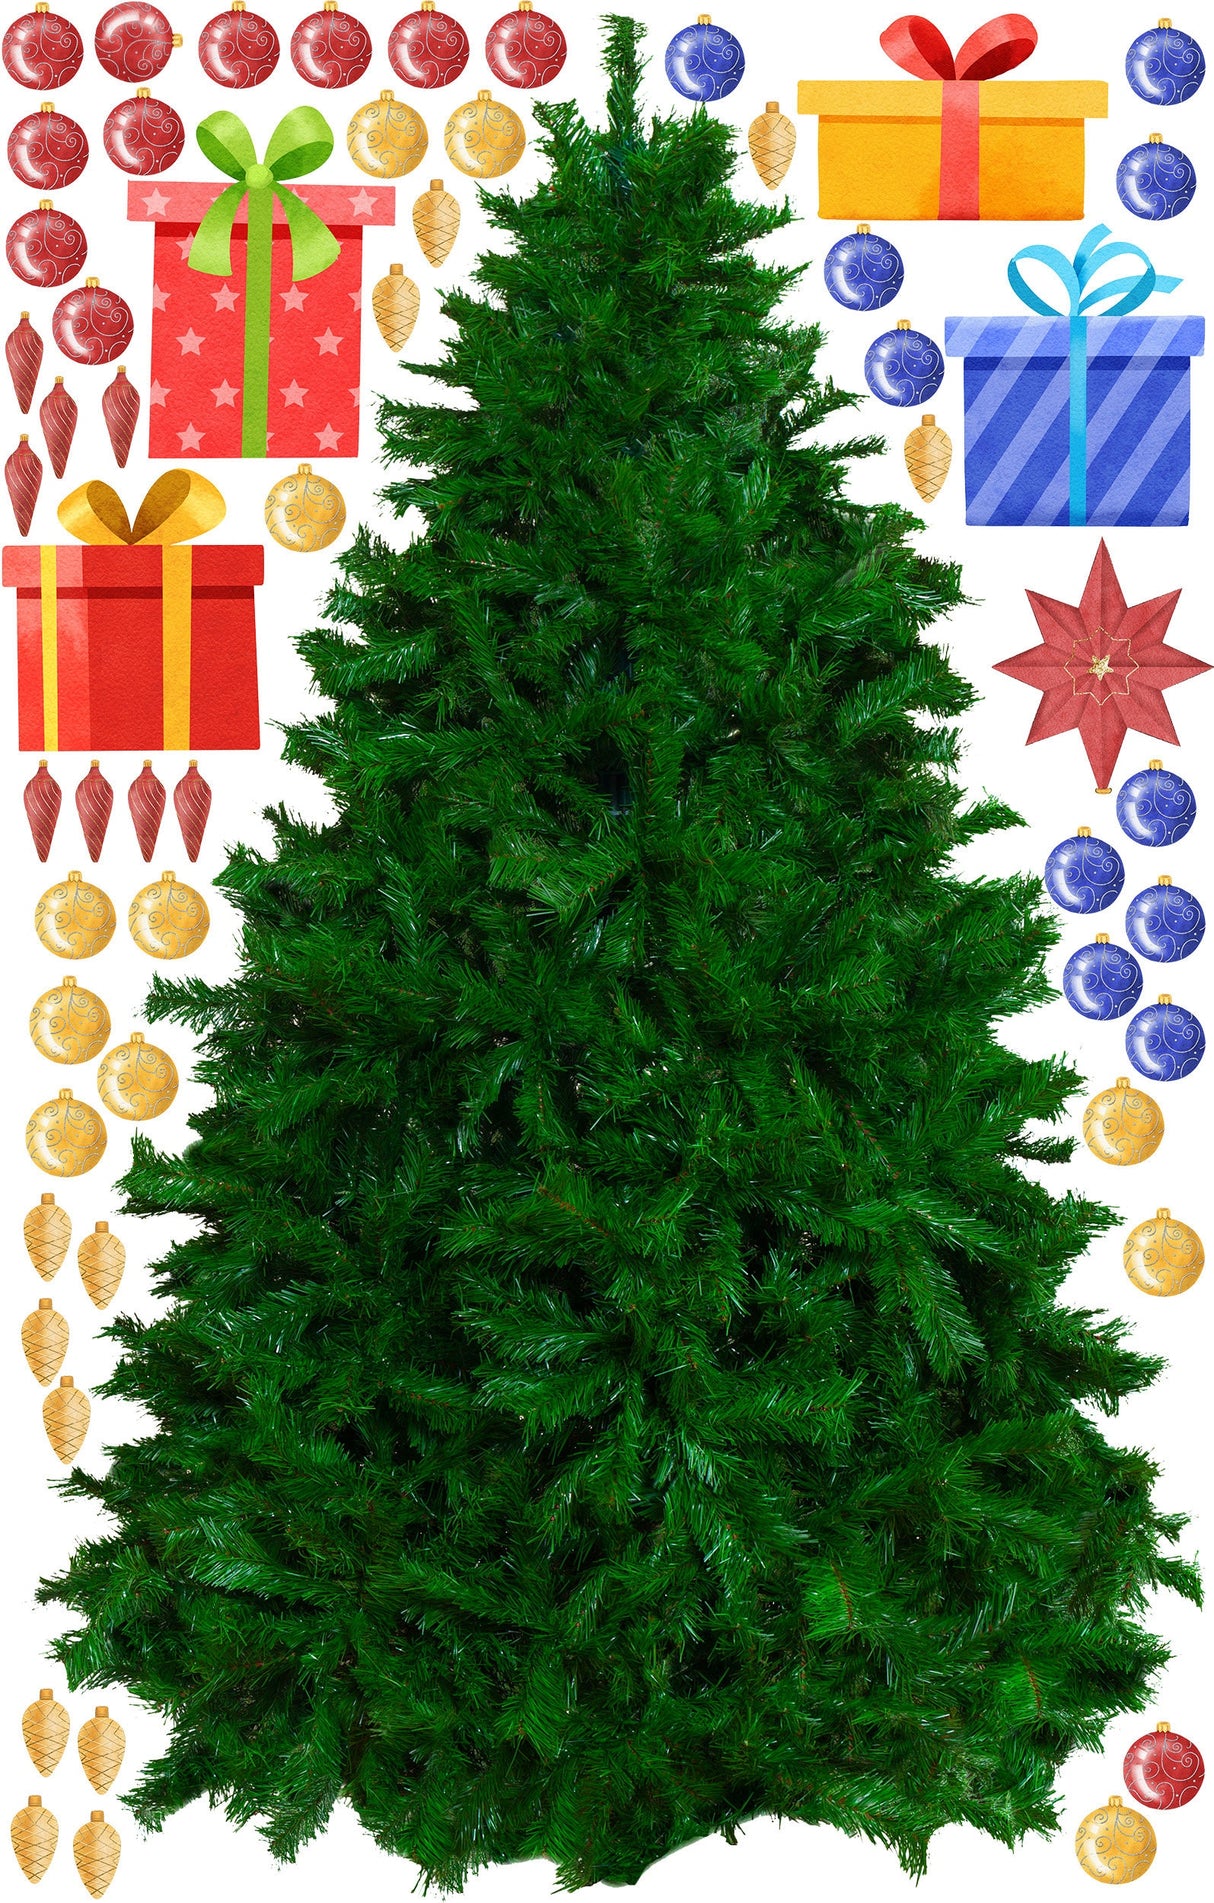 Large Christmas Tree Wall Sticker - Green Pine Vinyl Decal Decoration For Living Room